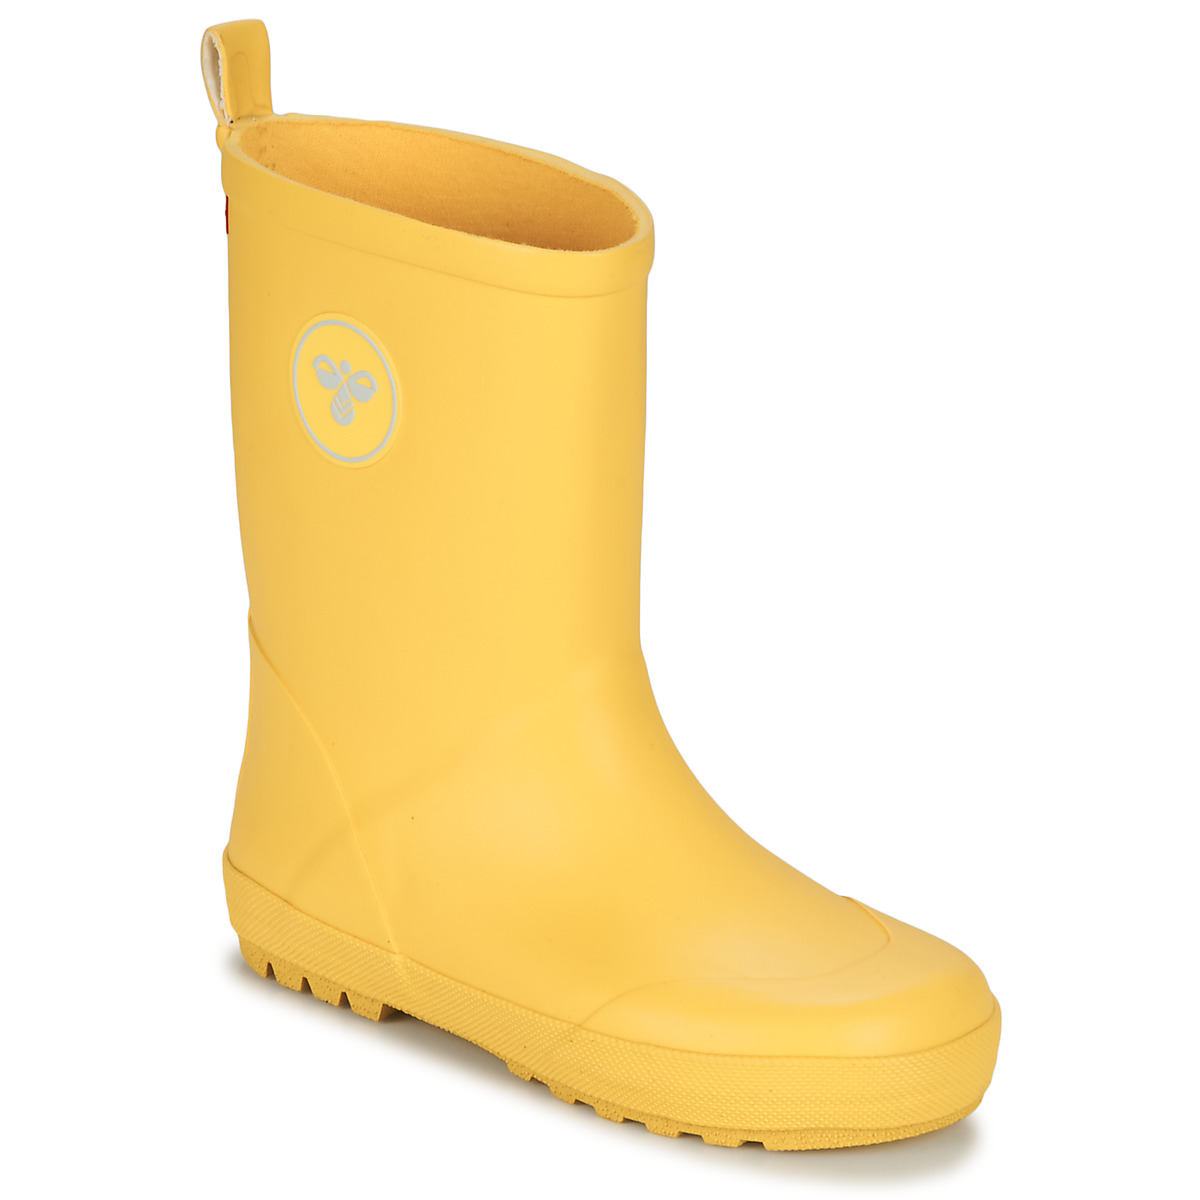 hummel RUBBER BOOT JR. Child NET Shoes Spartoo Free boots delivery | Wellington - Yellow ! 